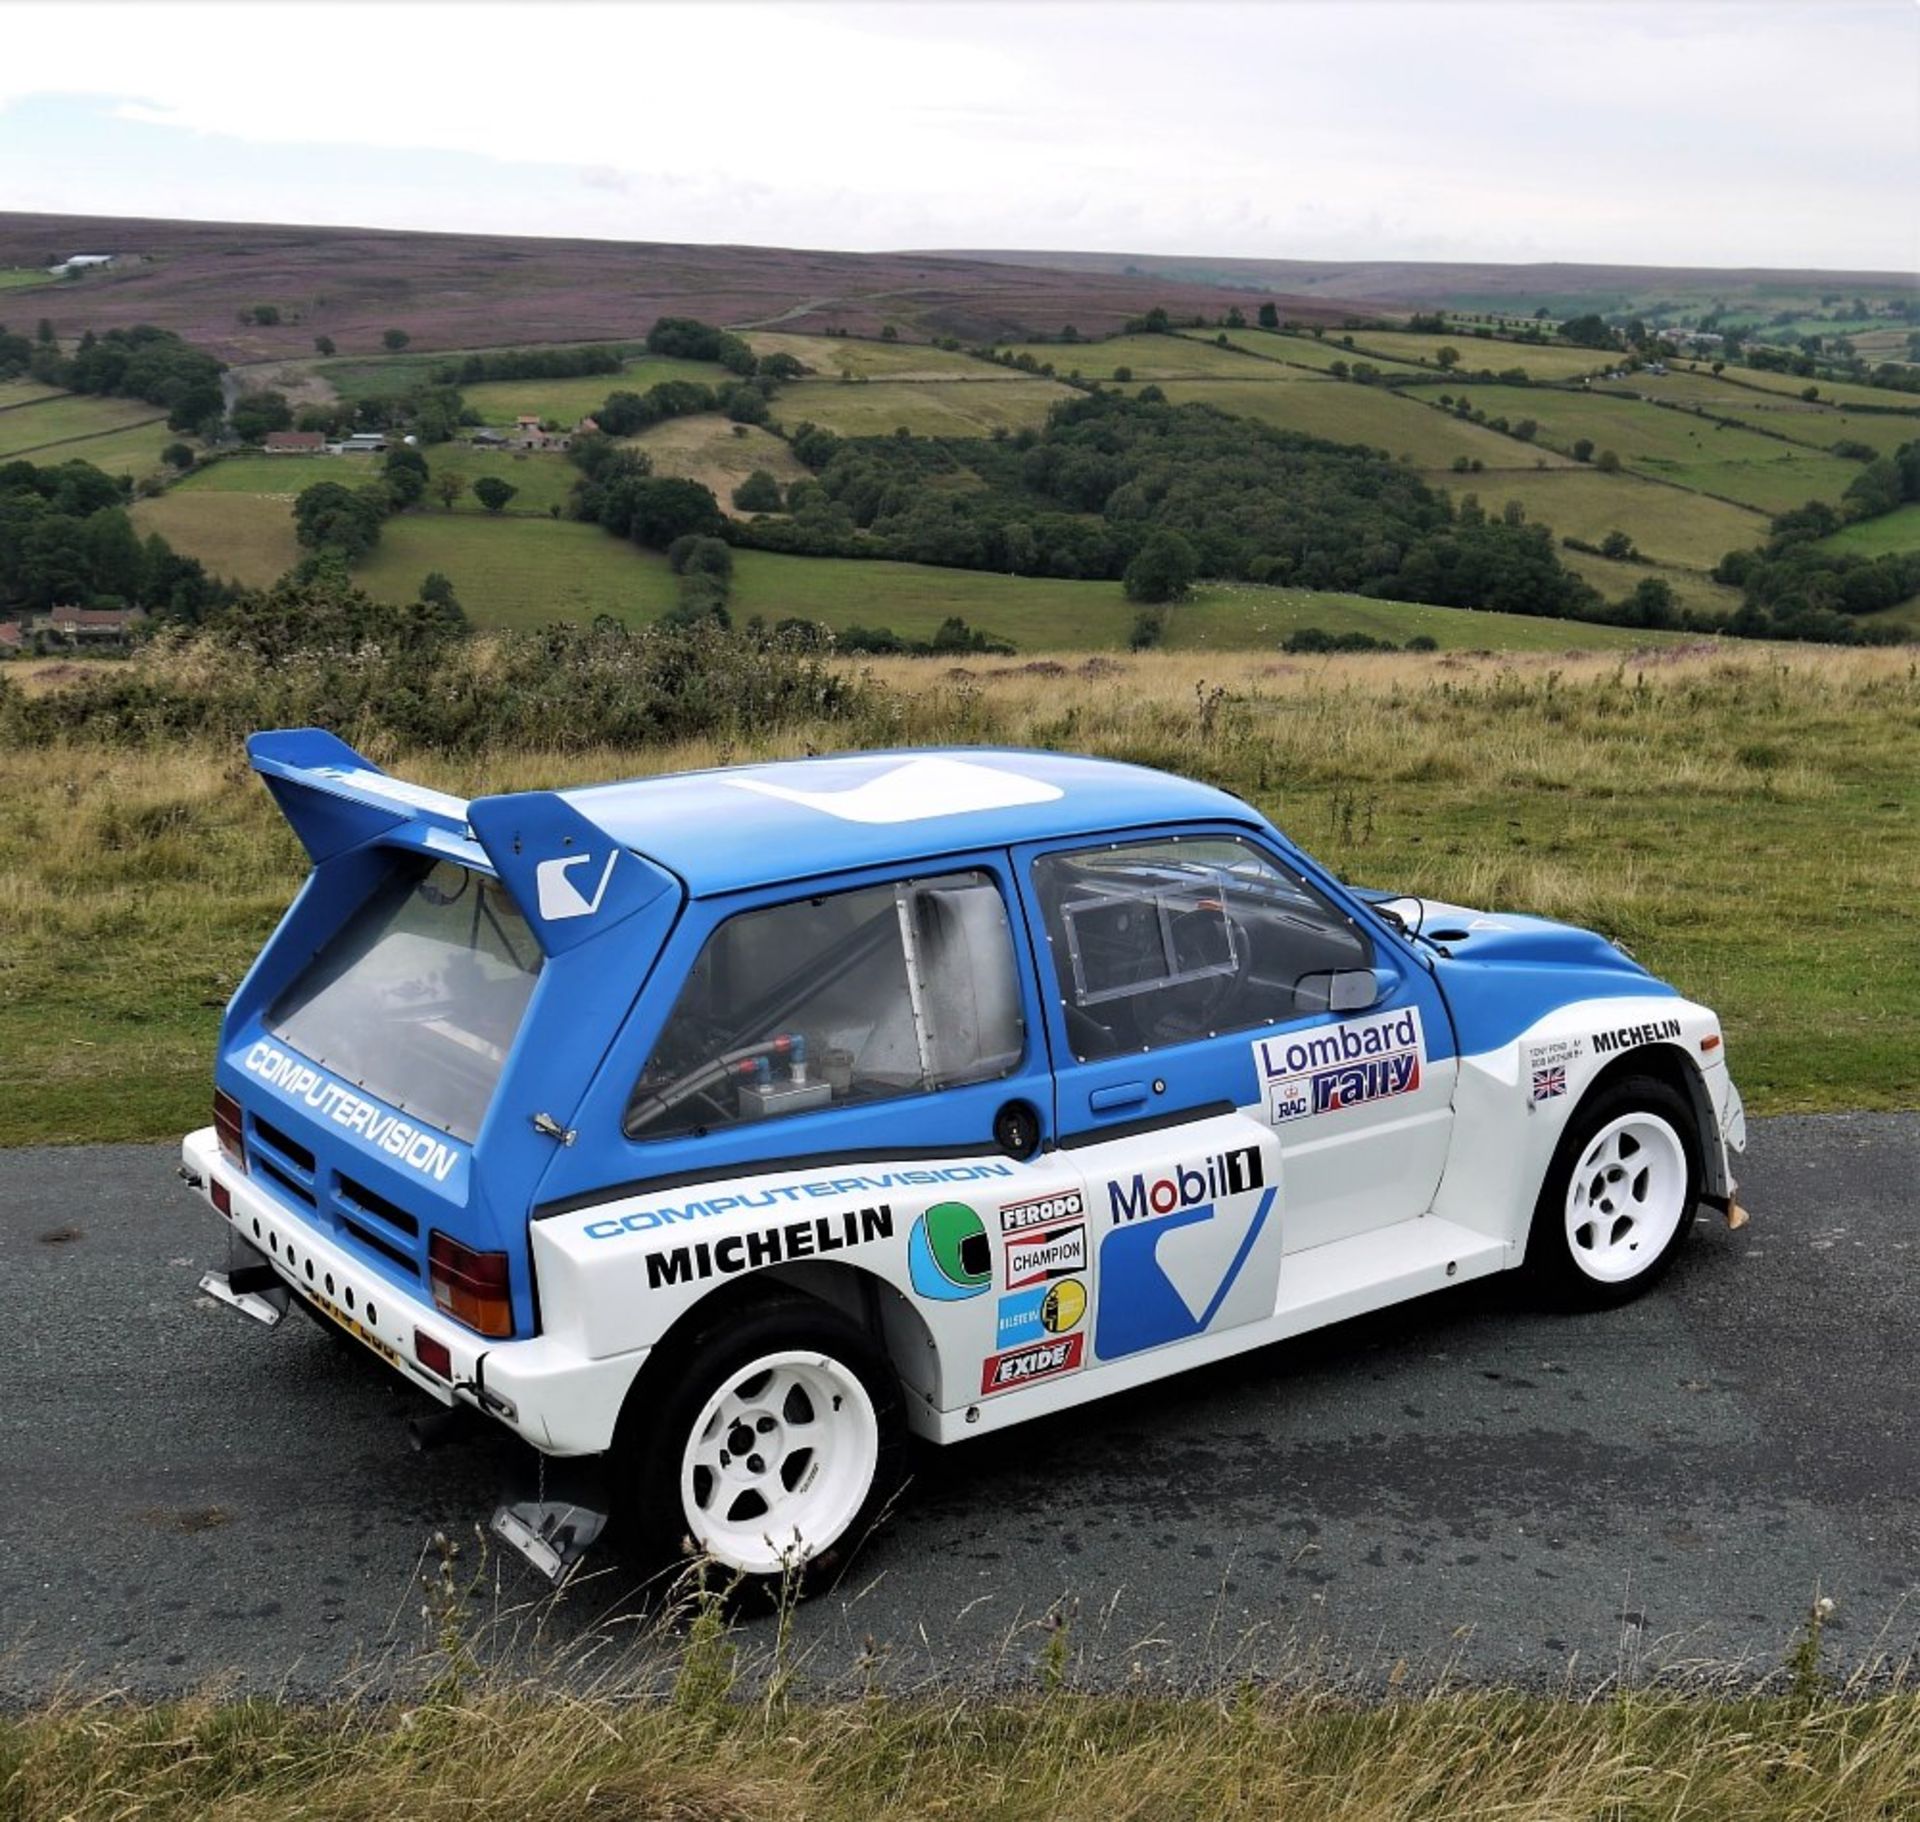 1985 MG Metro 6R4 Works Rally Car Registration Number: C874 EUD Chassis Number: #134  The MG Metro - Image 7 of 31